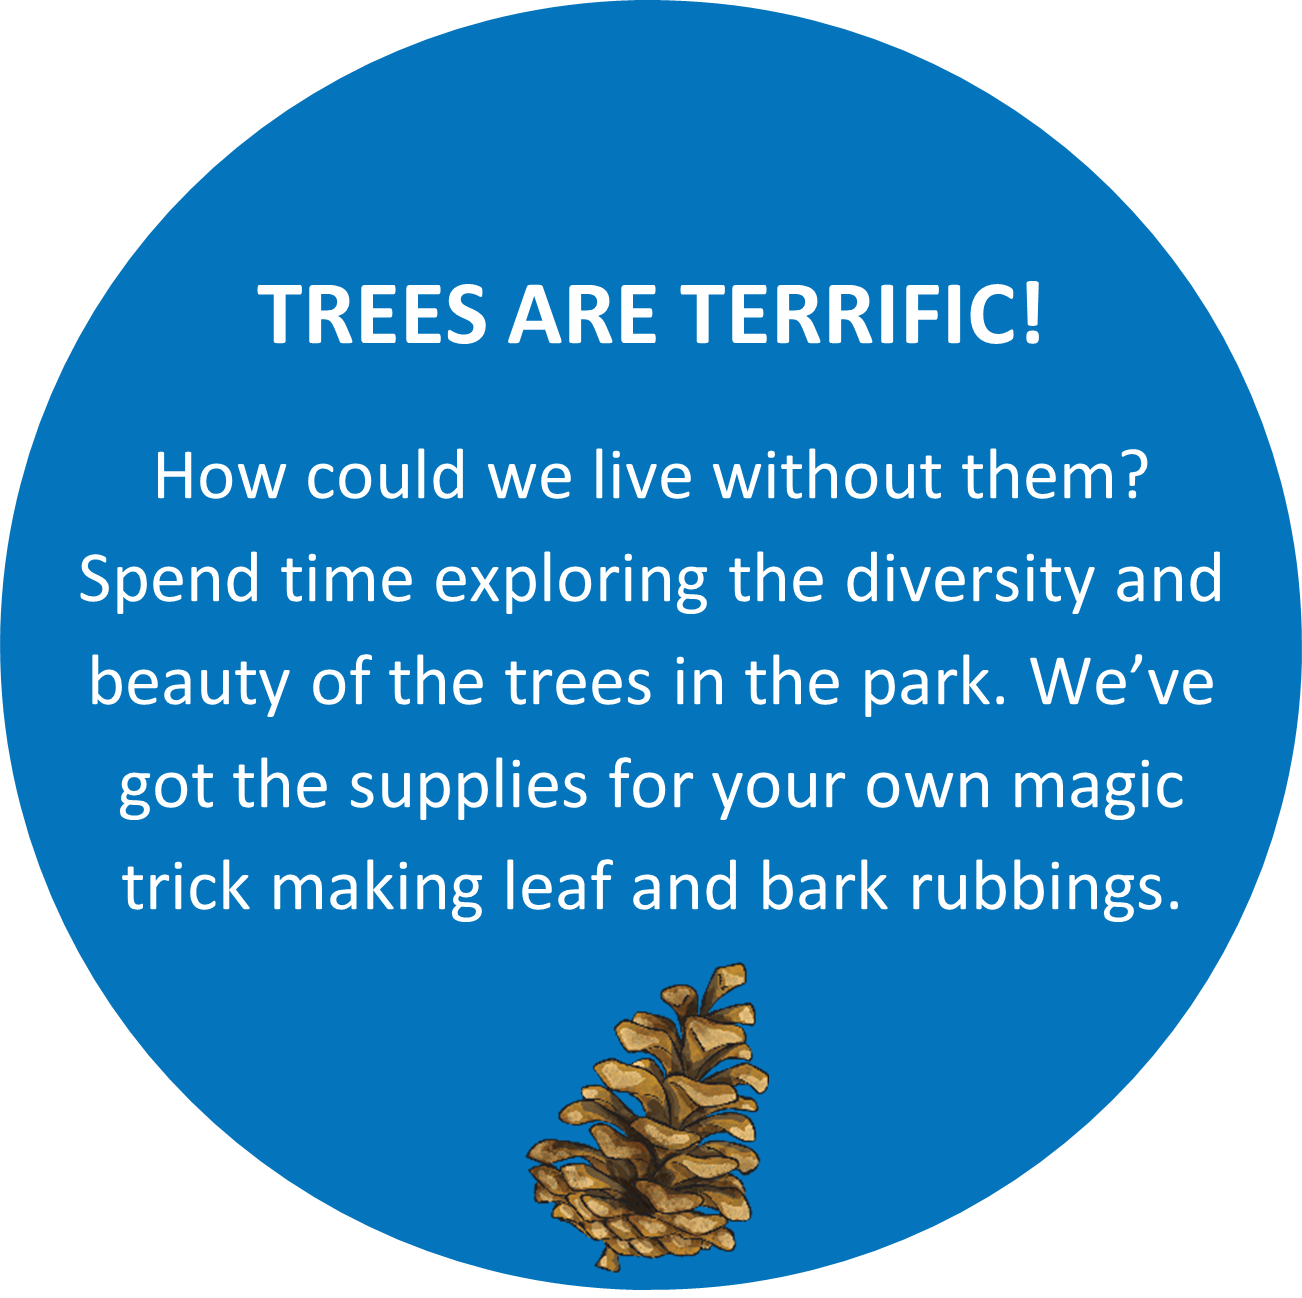 Text: TREES ARE TERRIFIC! How could we live without them? Spend time exploring the diversity and beauty of the trees in the park. We’ve got the supplies for your own magic trick making leaf and bark rubbings.